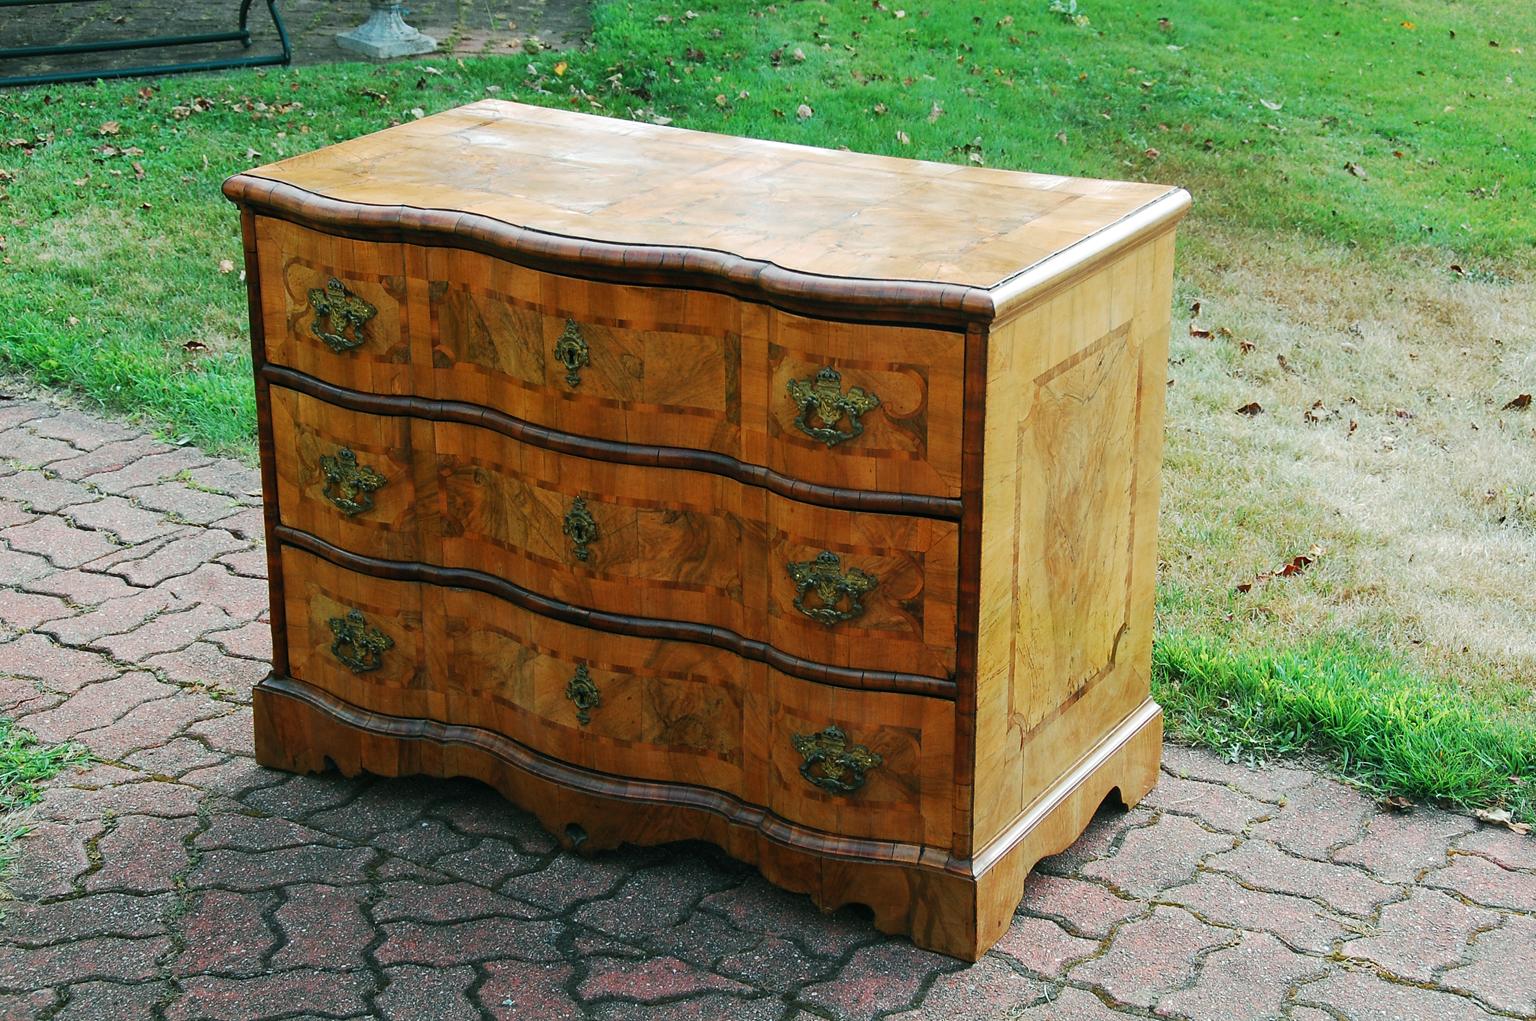 Italian serpentine shaped three drawer chest or commode with elaborate burl and heavily figured walnut parquetry inlay. The inlay covers the top, sides and front of this chest, making it quite fluid and strikingly lovely. This chest has a superb